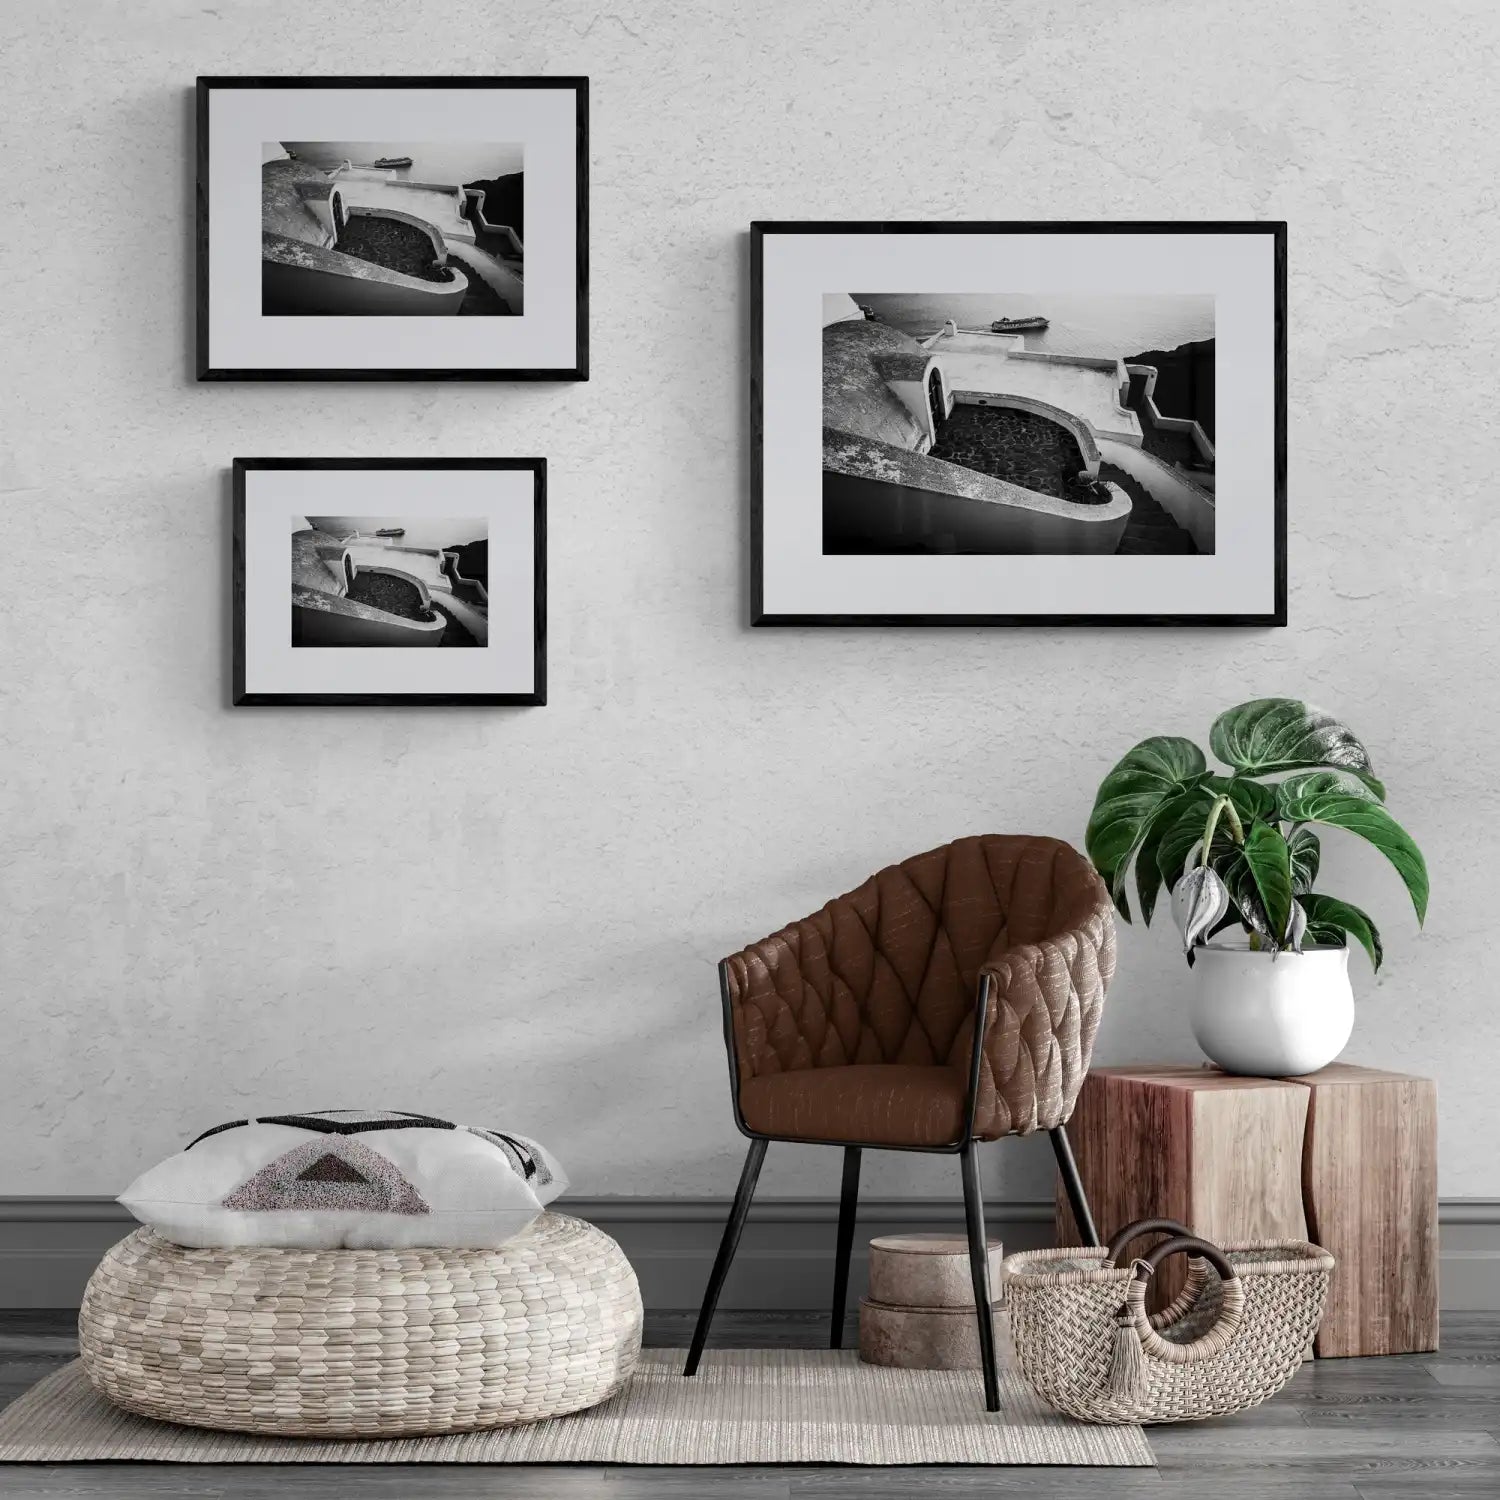 Top down view in Oia | Santorini | Chorōs | Black-and-white wall art photography from Greece - framing options